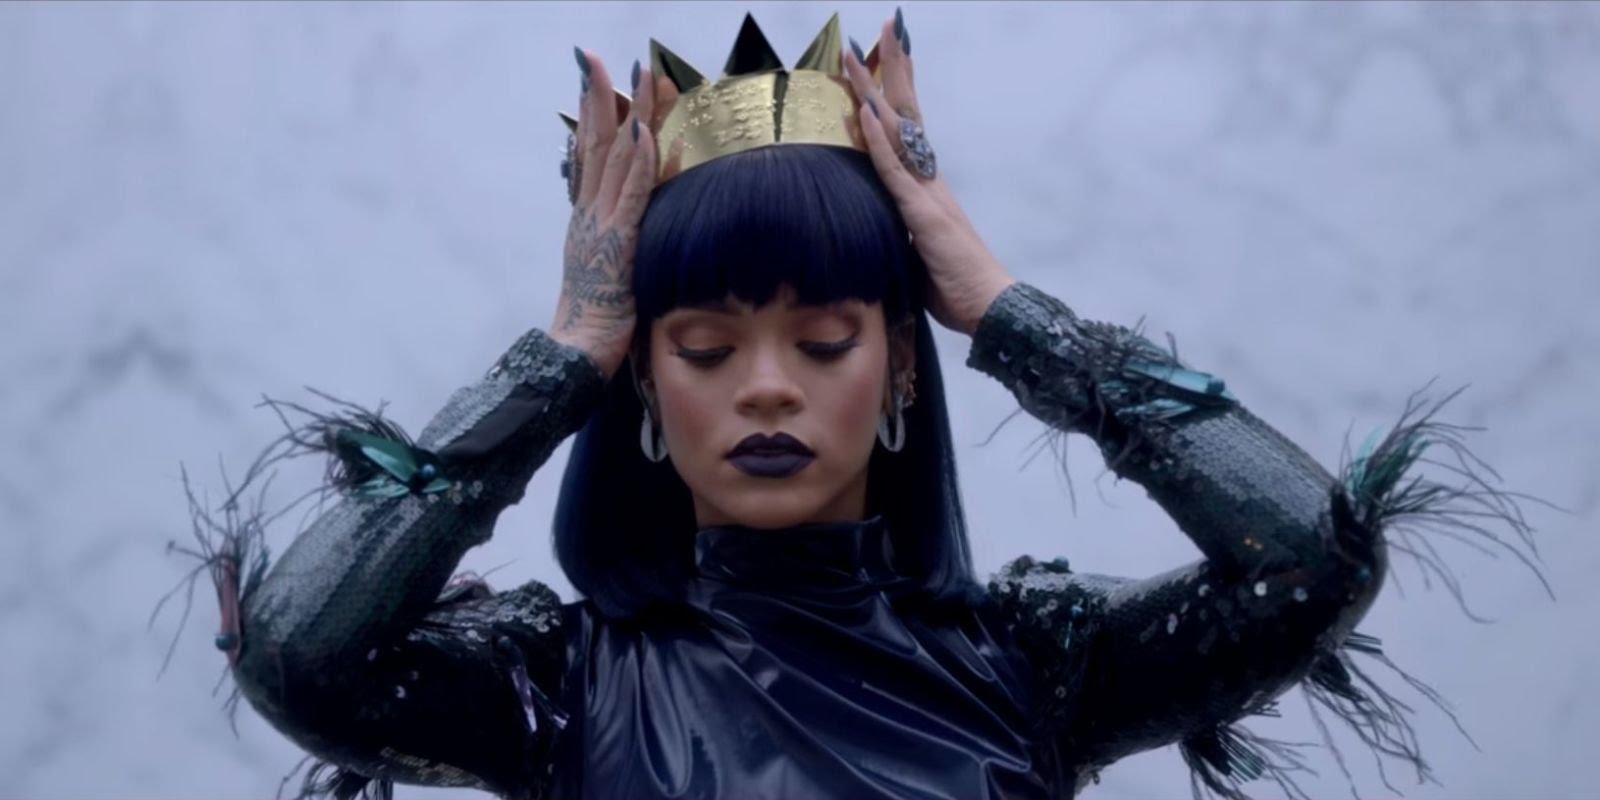 Rihanna 1 1 Arena Pile Top 10 Sexiest Women in Pop Music In The World